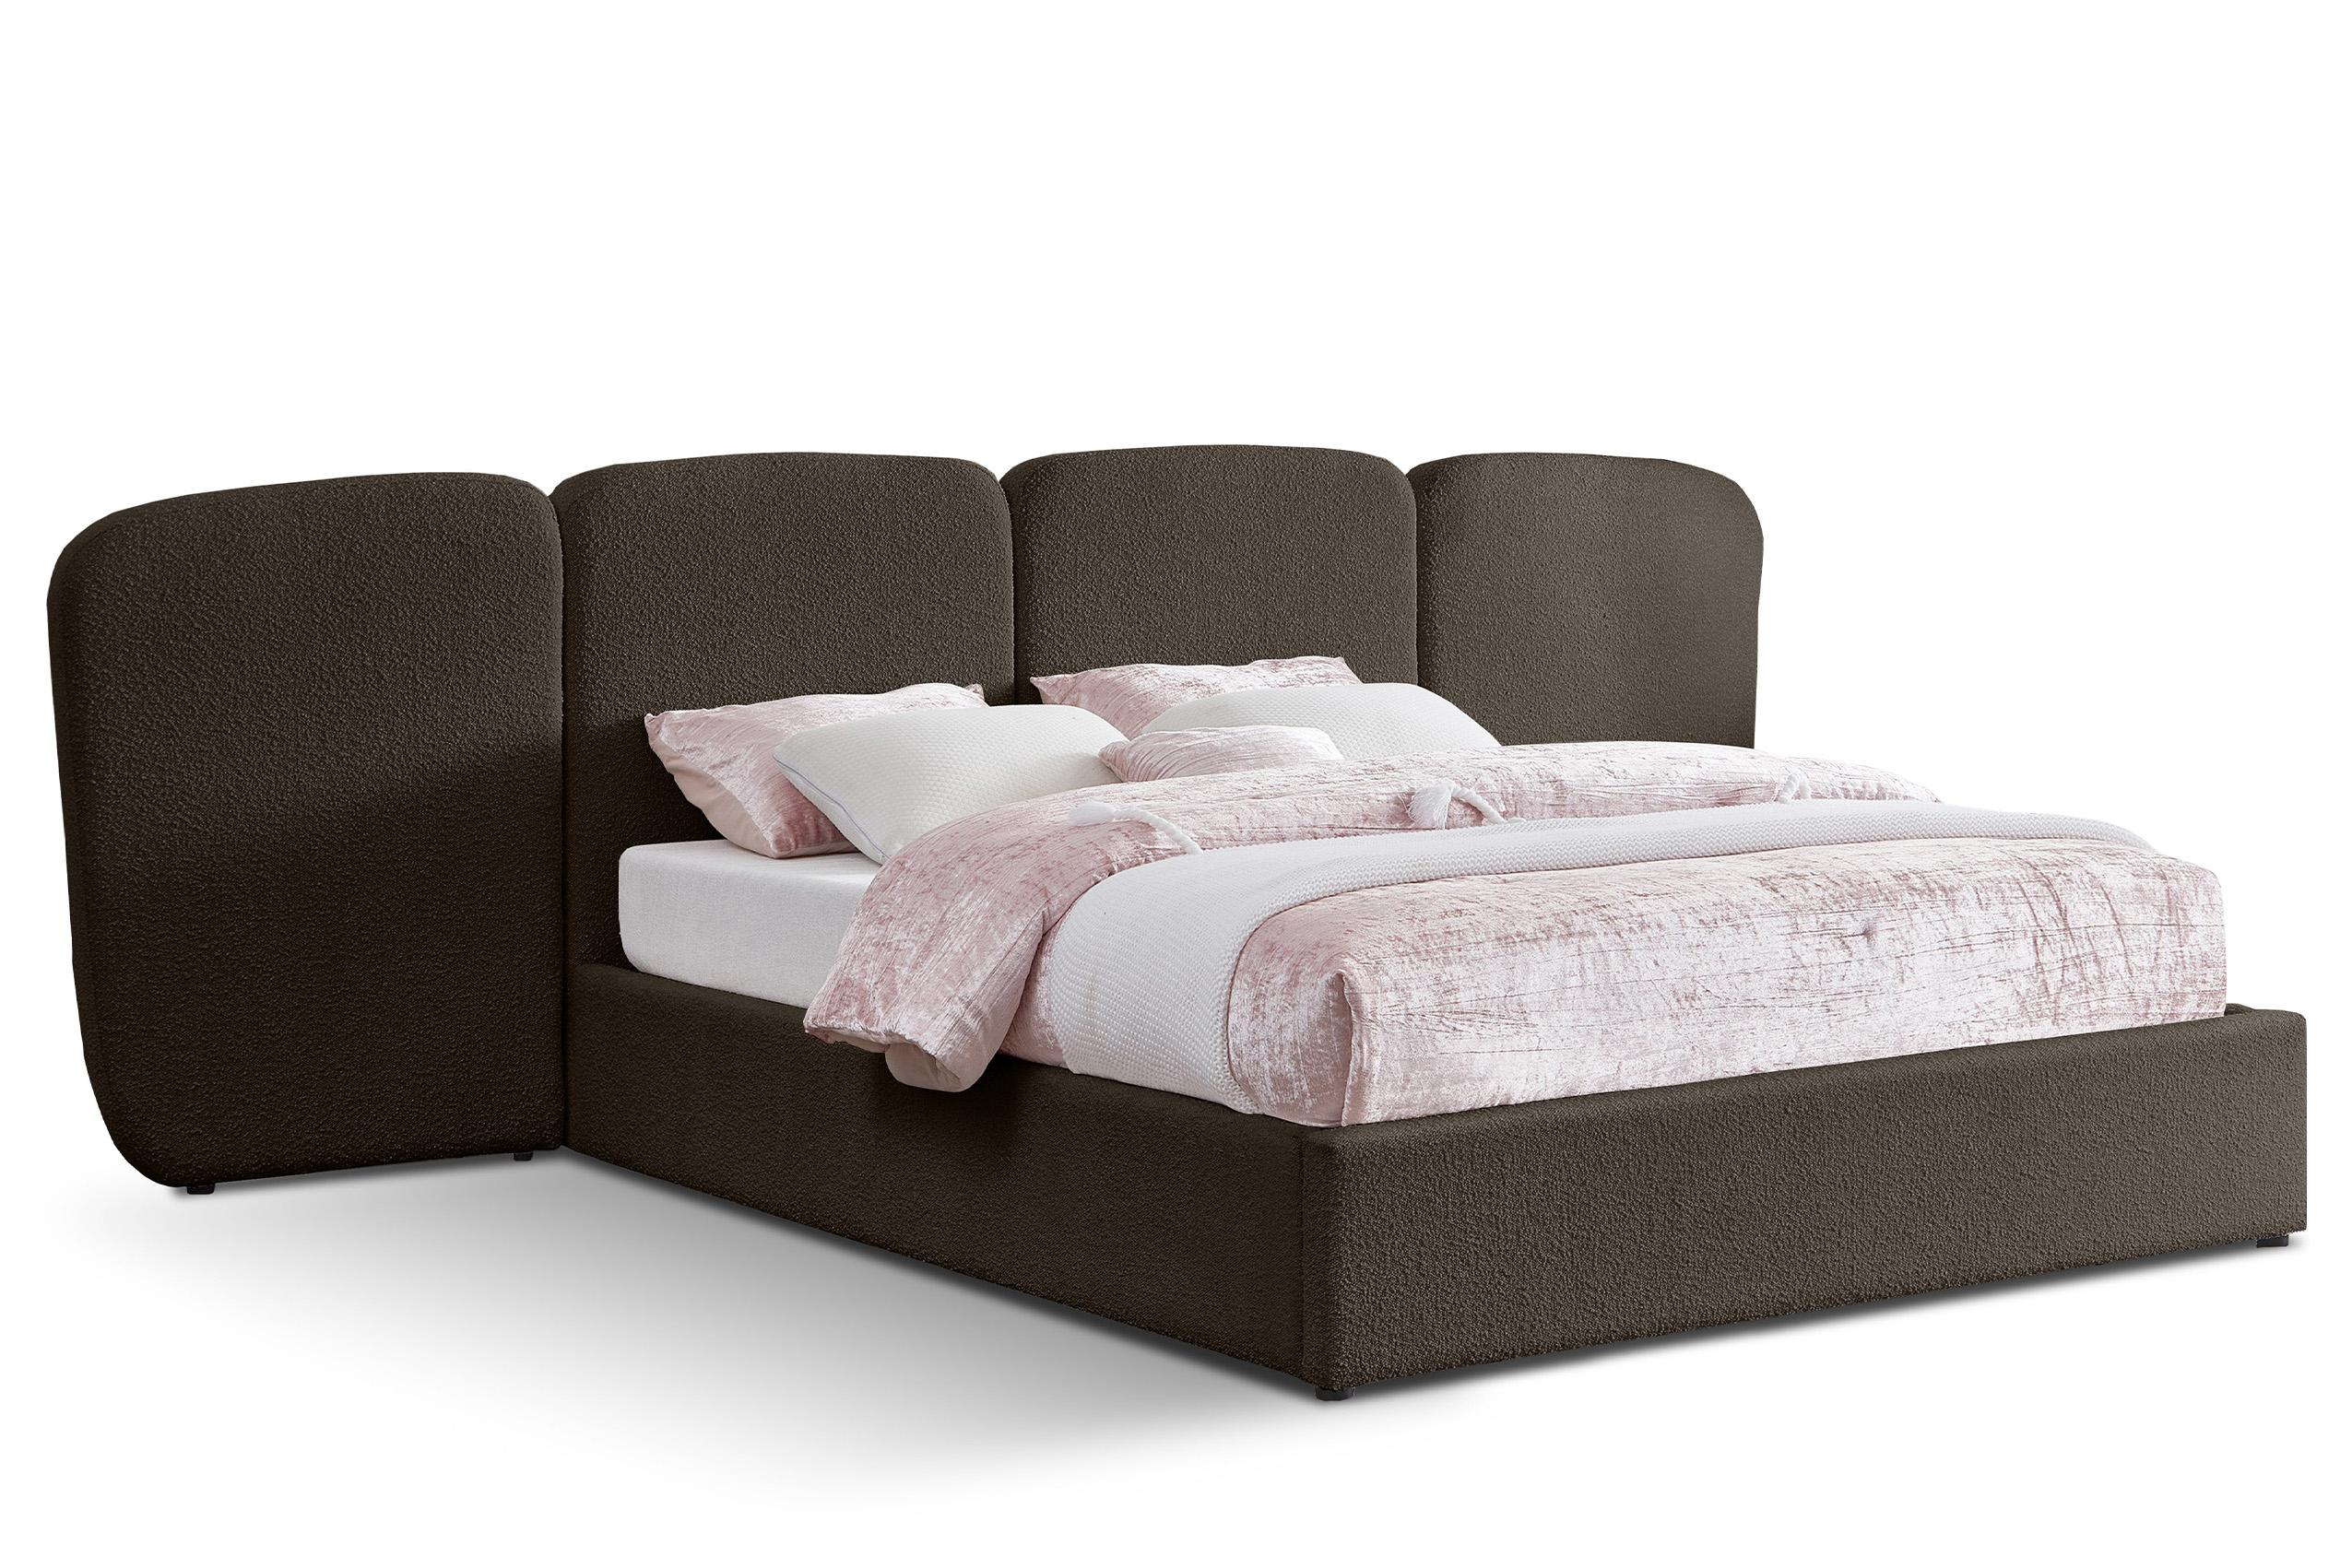 Contemporary, Modern Platform Bed ShilohBrown-Q ShilohBrown-Q in Brown 